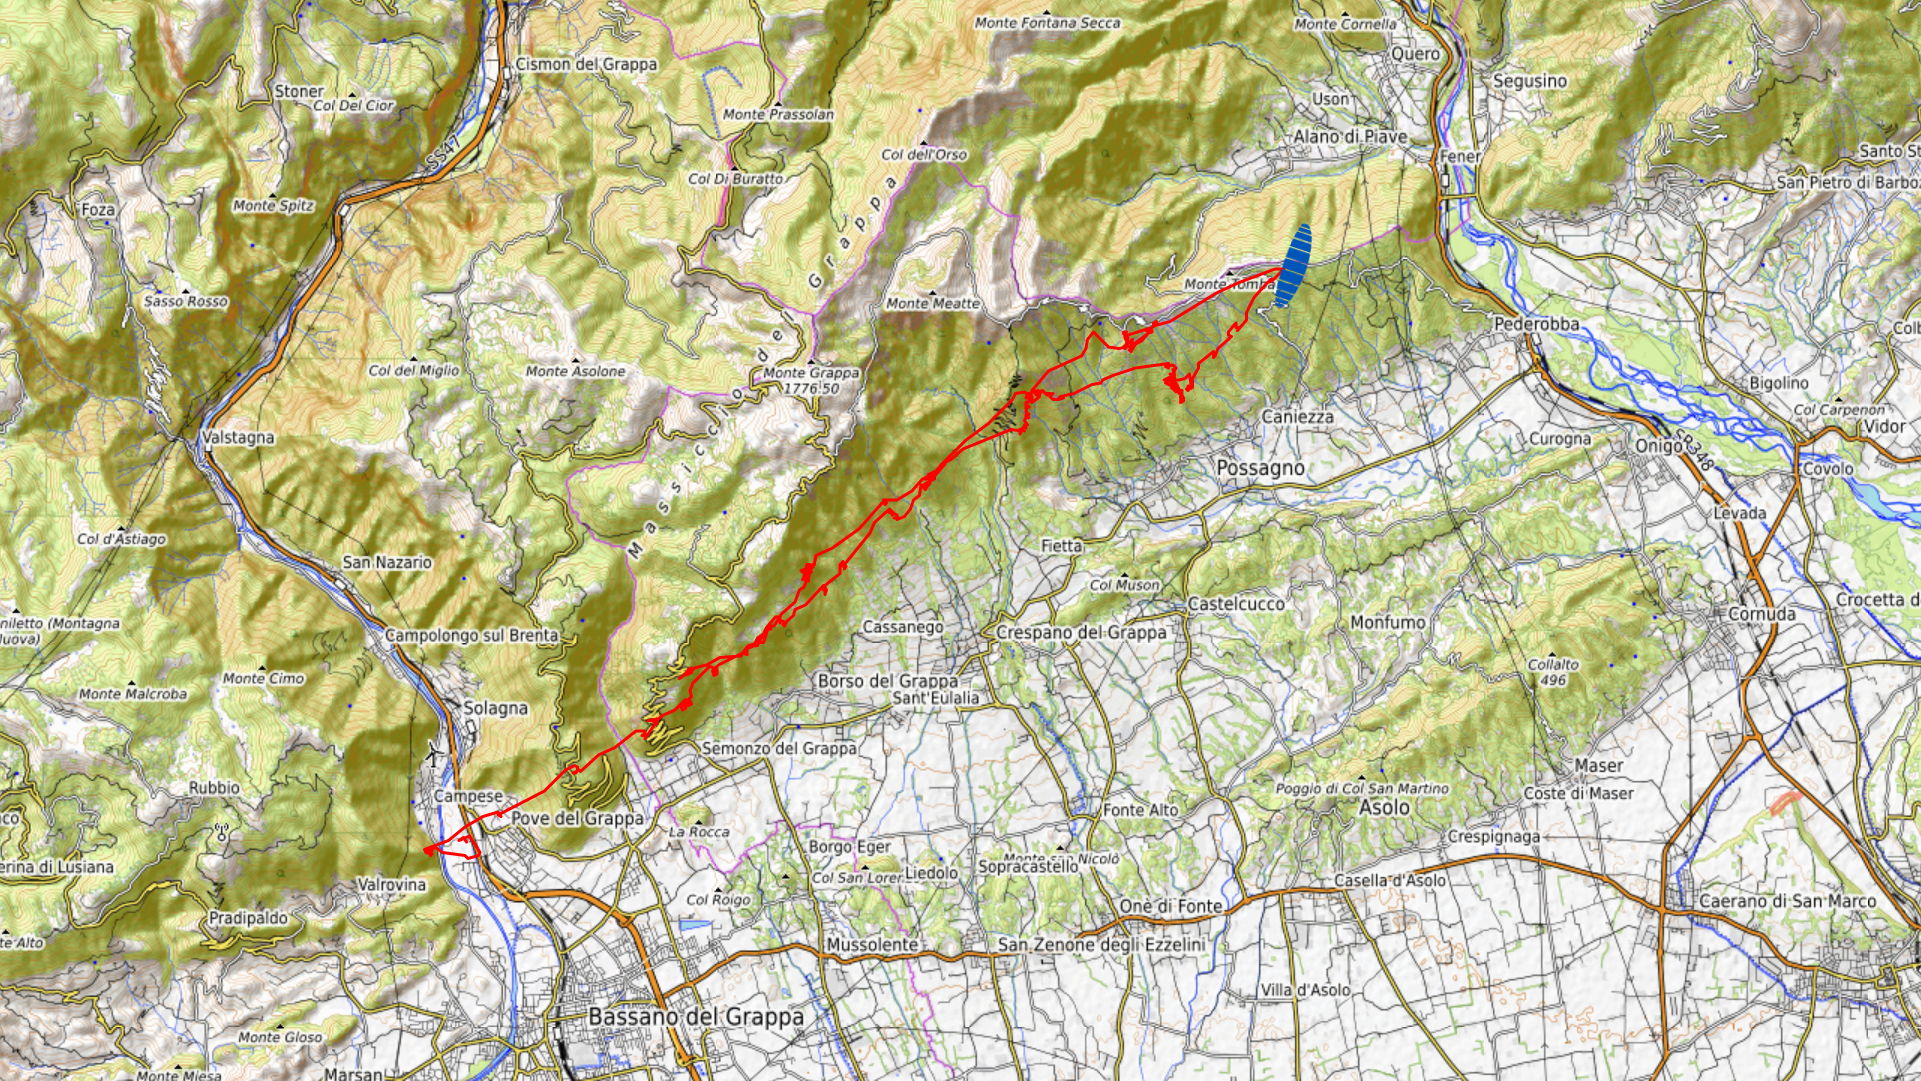 You are currently viewing Mount Grappa, Italien am 17.04.2022